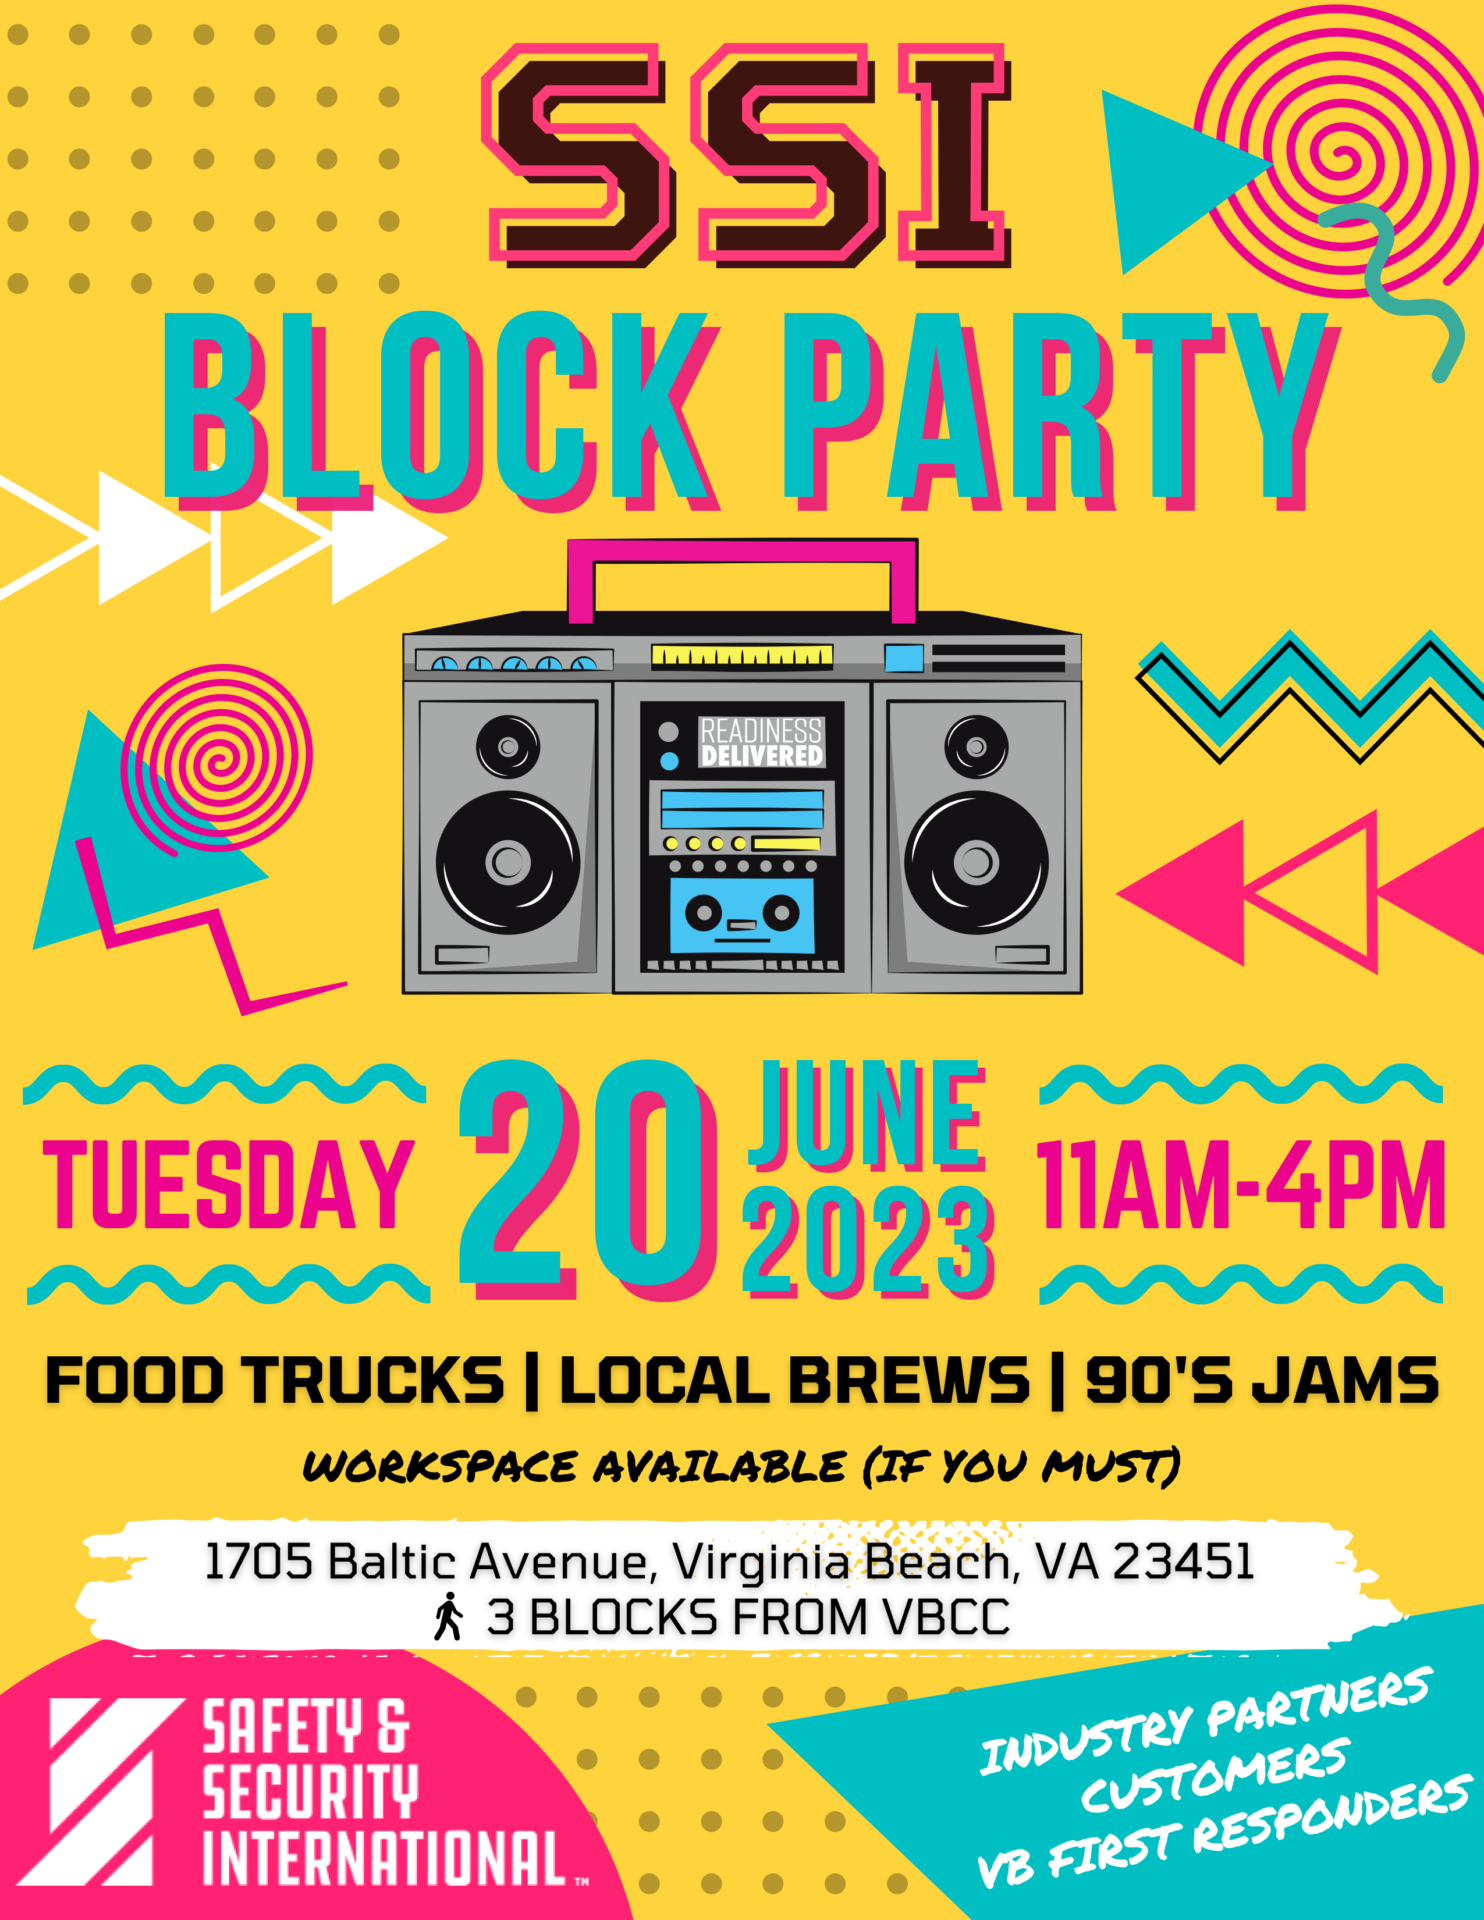 SSI Block Party Promotional Poster. Tuesday June 20th 2023, 11AM-4PM.